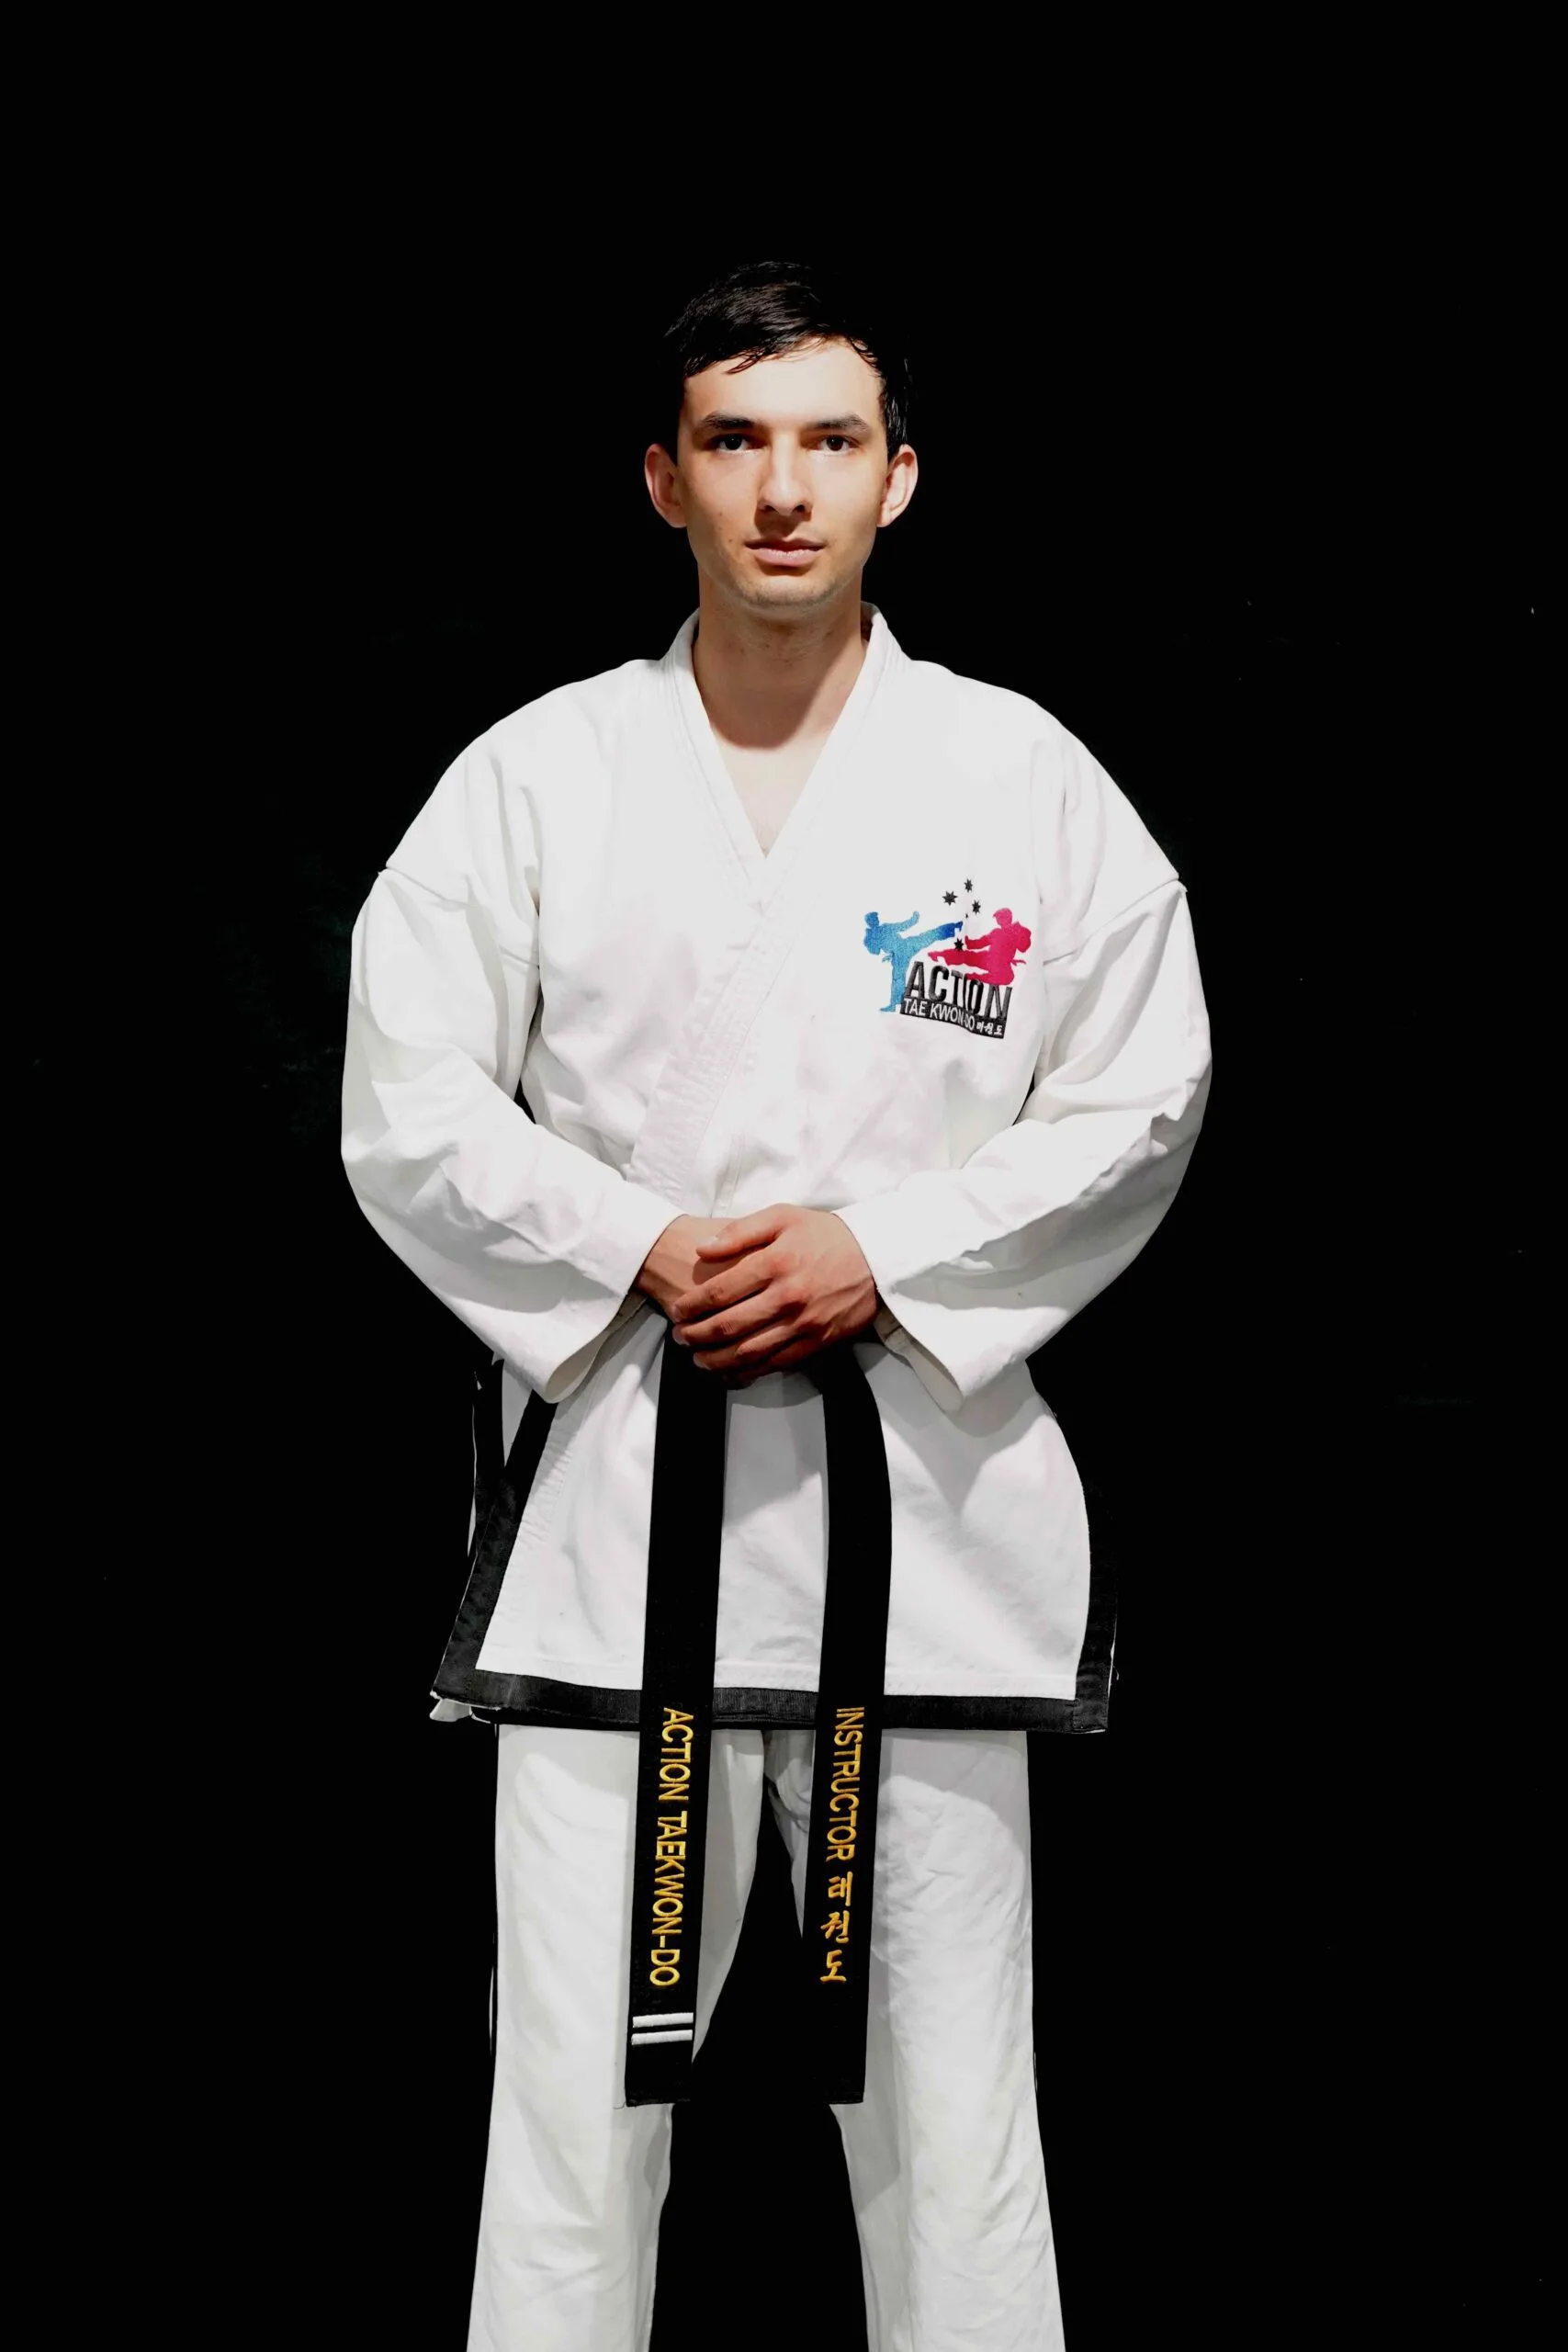 Instructor Alfred Ding of Action Tae Kwon-Do.